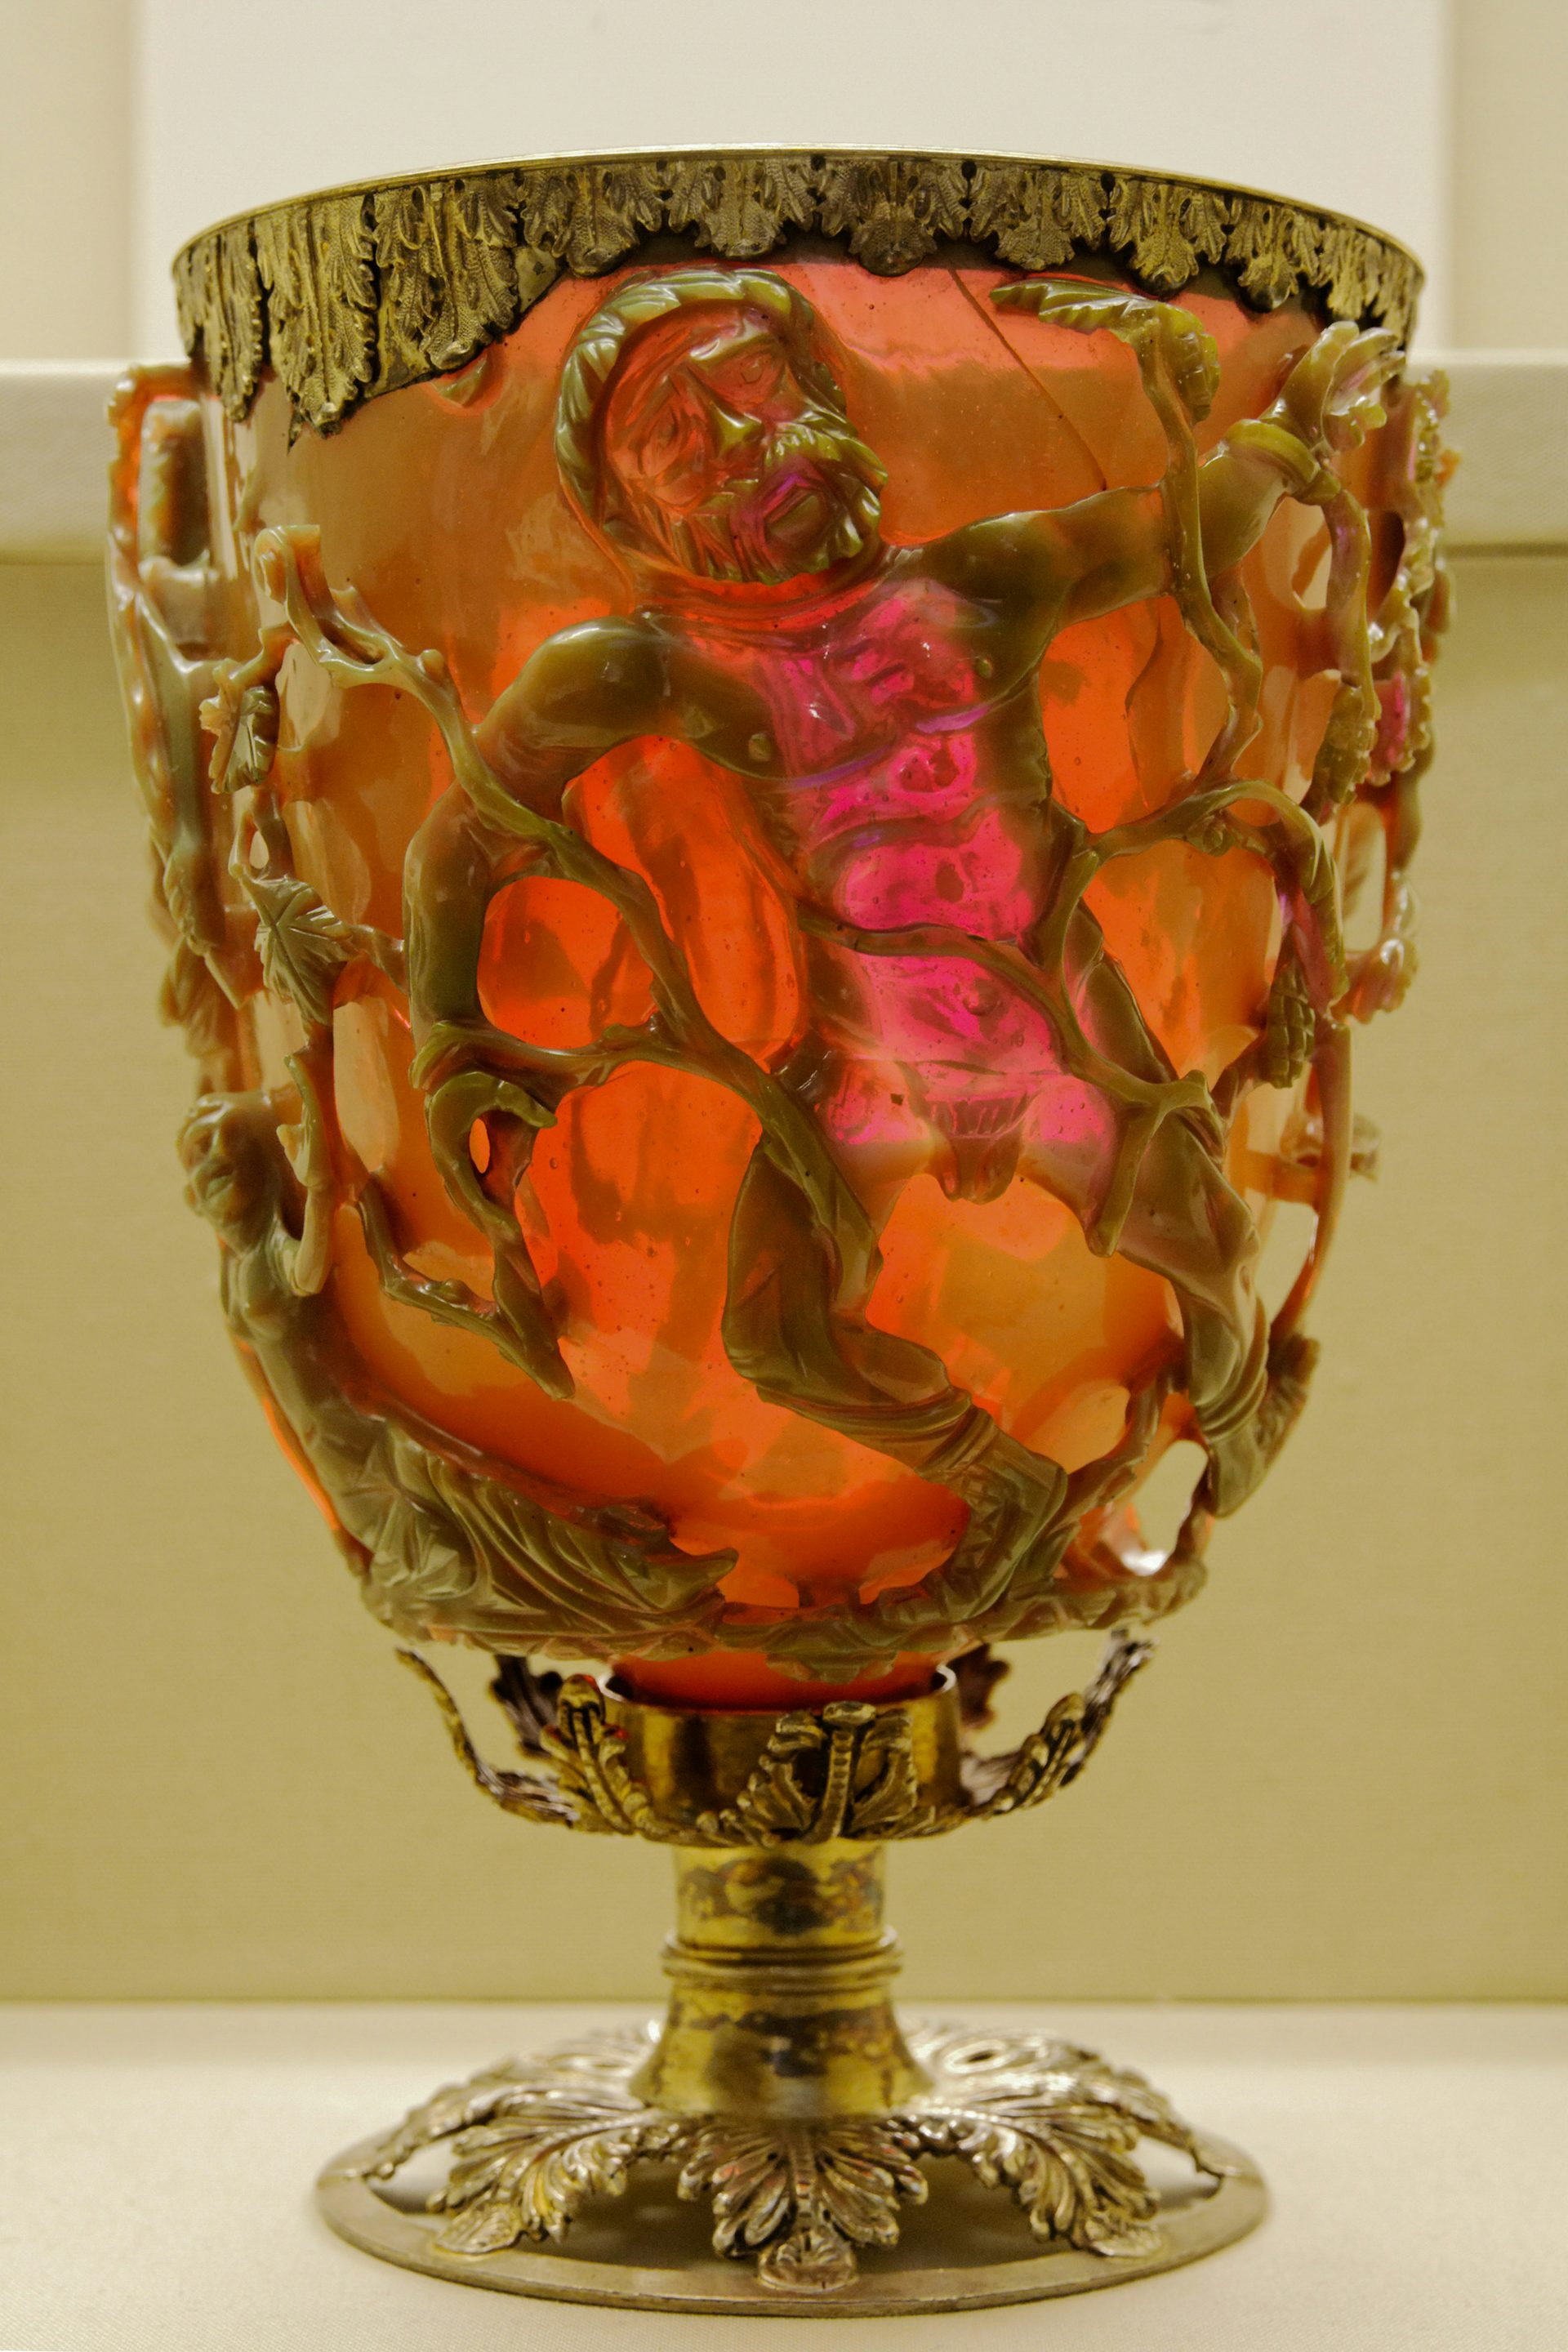 The "Lycurgus Cup"